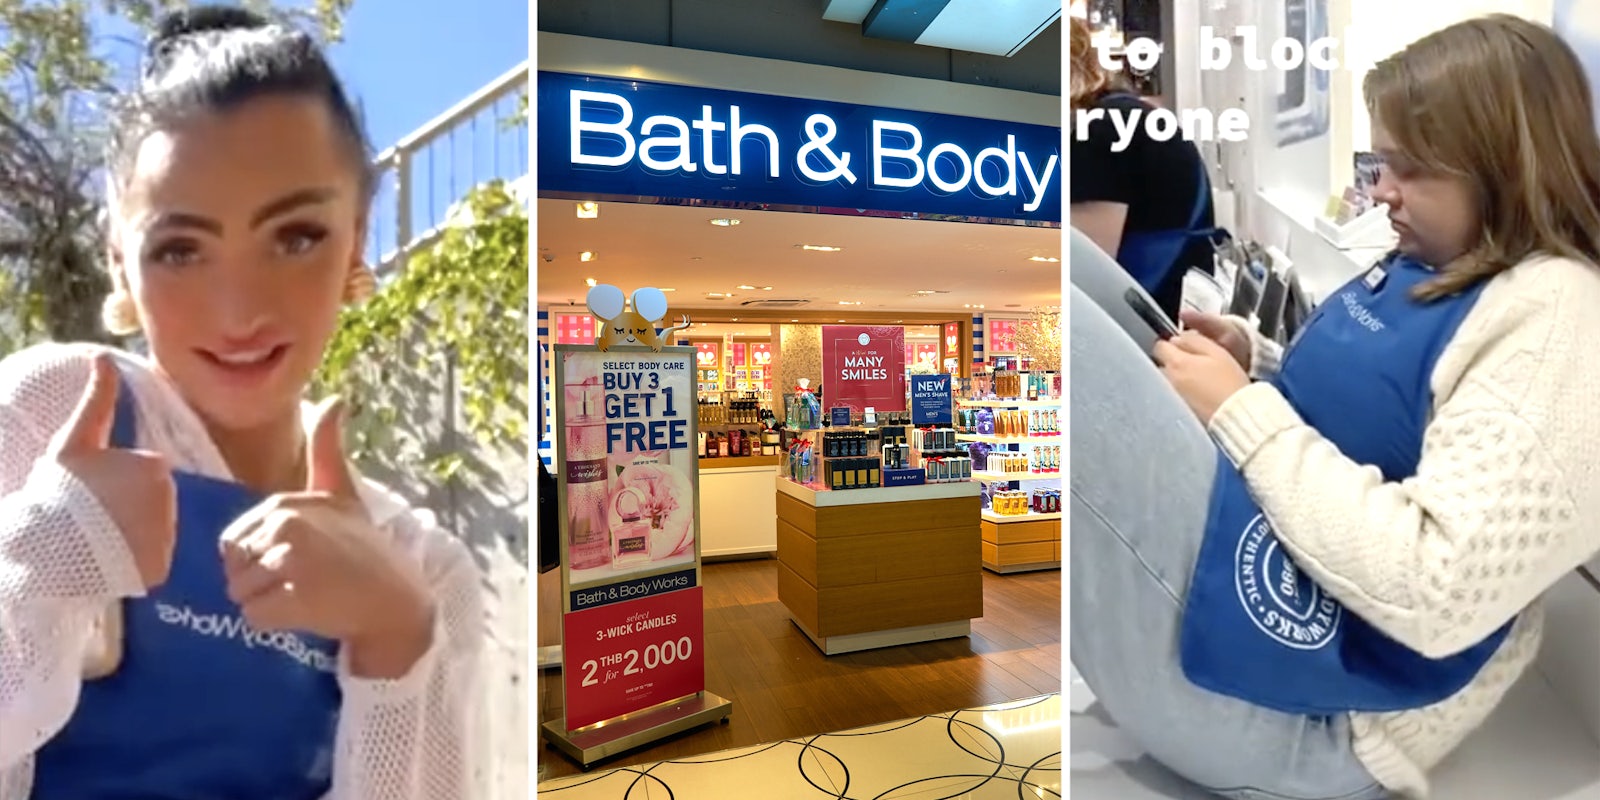 Woman with thumbs up(l), Bath & Bodyworks store(c), Worker on phone(r)